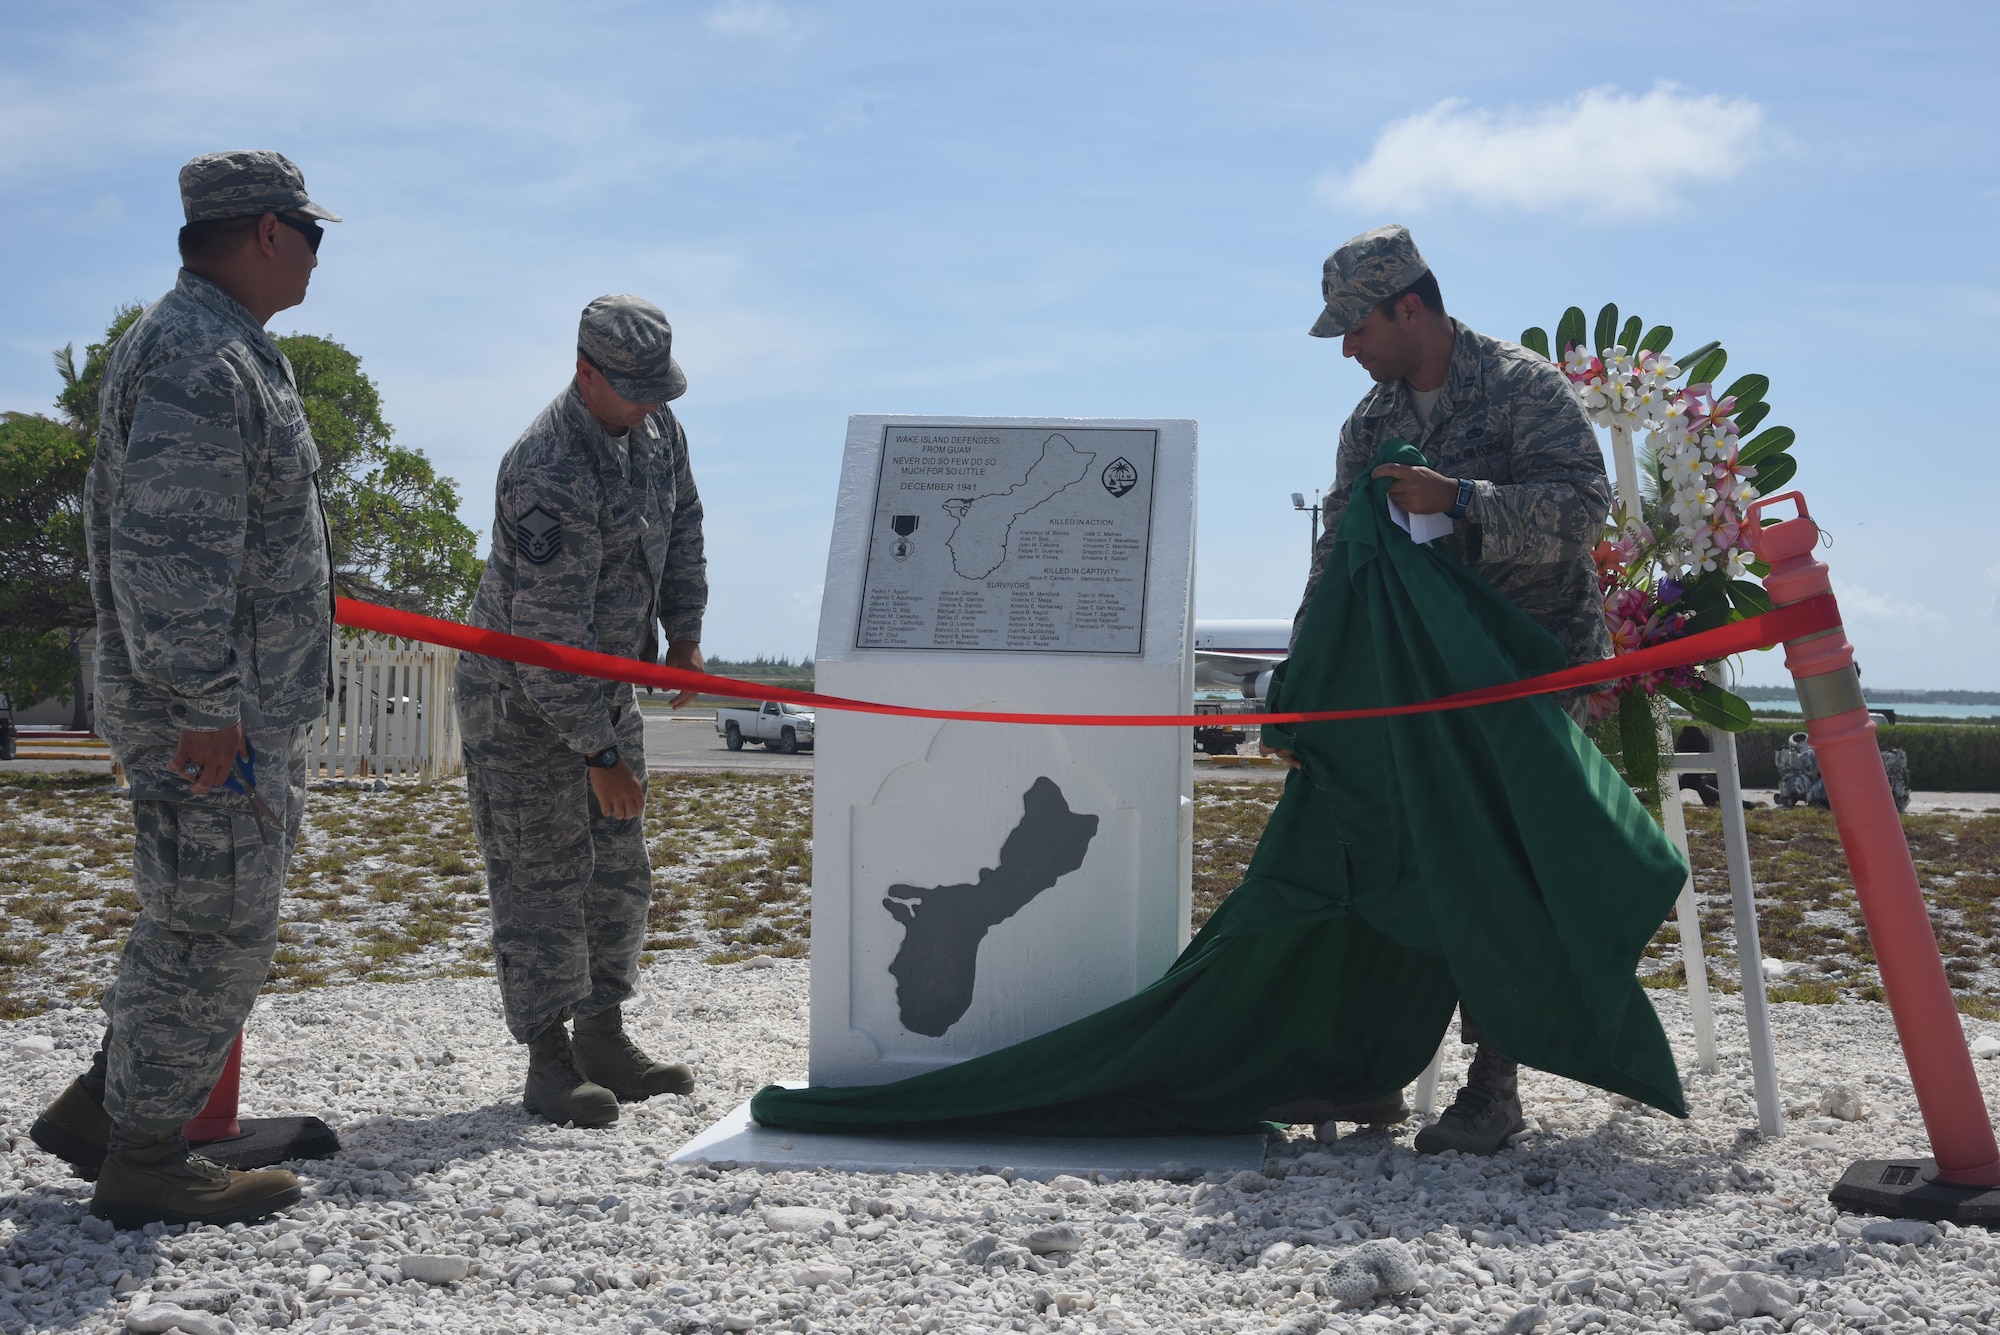 Col. Frank Flores (left), Pacific Air Forces Regional Support Center commander, and Capt. Allen Jaime (right), Wake Island Det. 1 commander, PRSC, unveil the newly renovated memorial during the Guam Memorial rededication ceremony June 8, 2017. The Guam Memorial on Wake Island was erected in 1991 to honor 45 Chamorros from Guam who worked for Pan American airlines. On Dec. 8, 1941, just a few hours of the attack on Pearl Harbor, Hawaii, Japanese forces attacked Wake Island and 10 of the 45 Chamorros were killed in the attack. The remaining 35 men were sent to prison camps in Japan and China where two died in captivity. Due to decades of corrosion, heat and sun, the memorial was degraded to the point where it became unreadable. During many months in 2017, the Guam Memorial was renovated to its original glory.